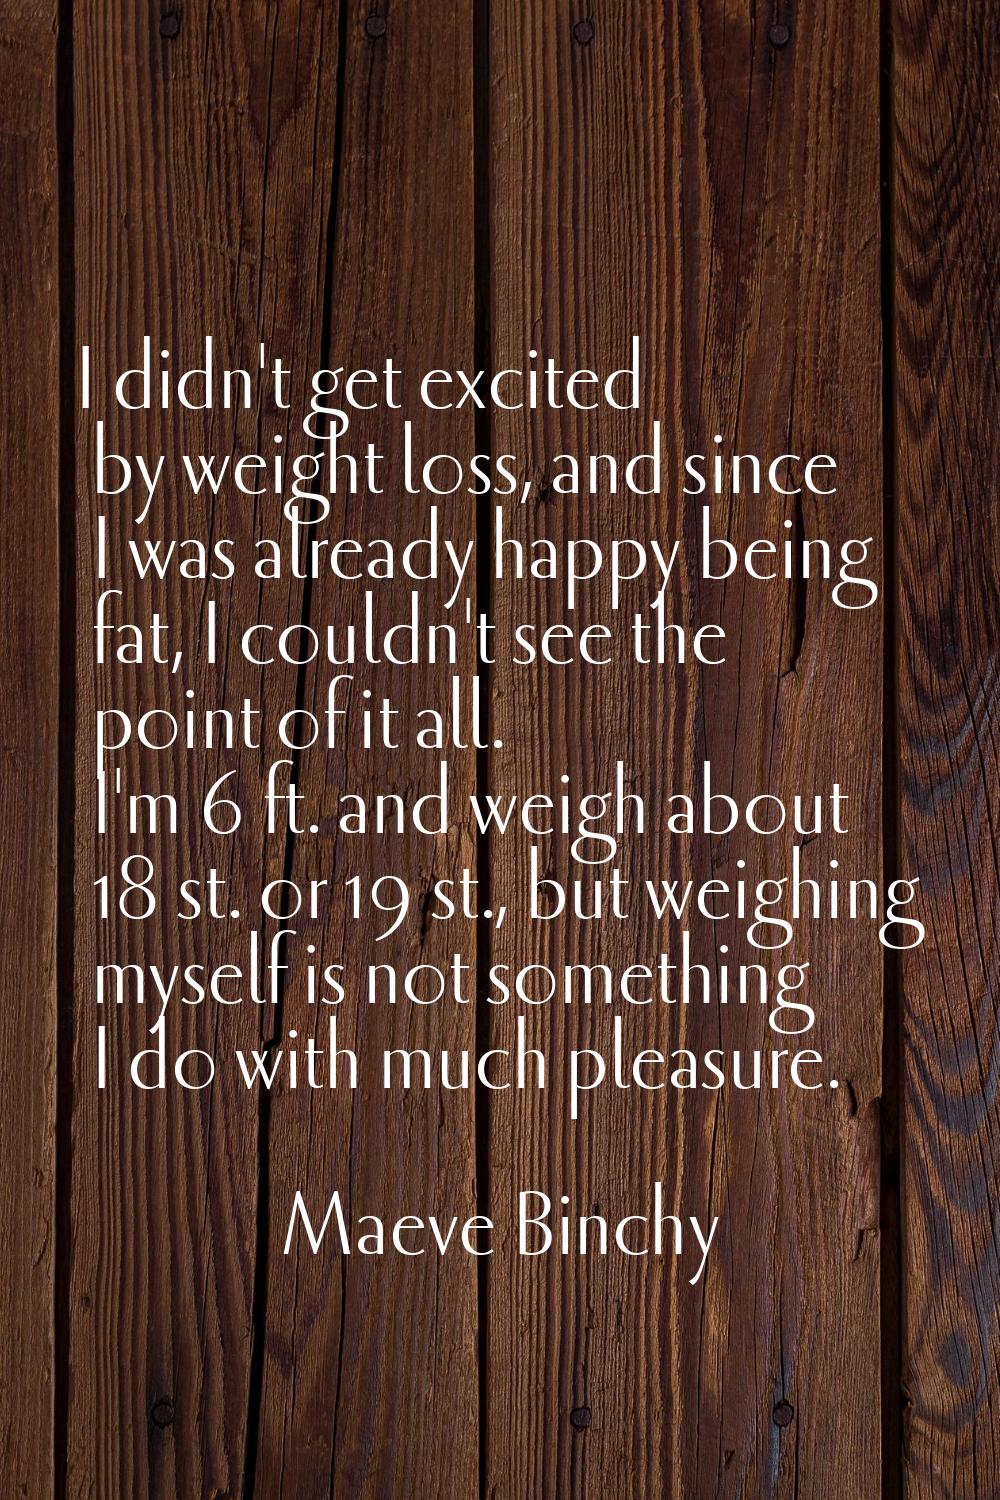 I didn't get excited by weight loss, and since I was already happy being fat, I couldn't see the po